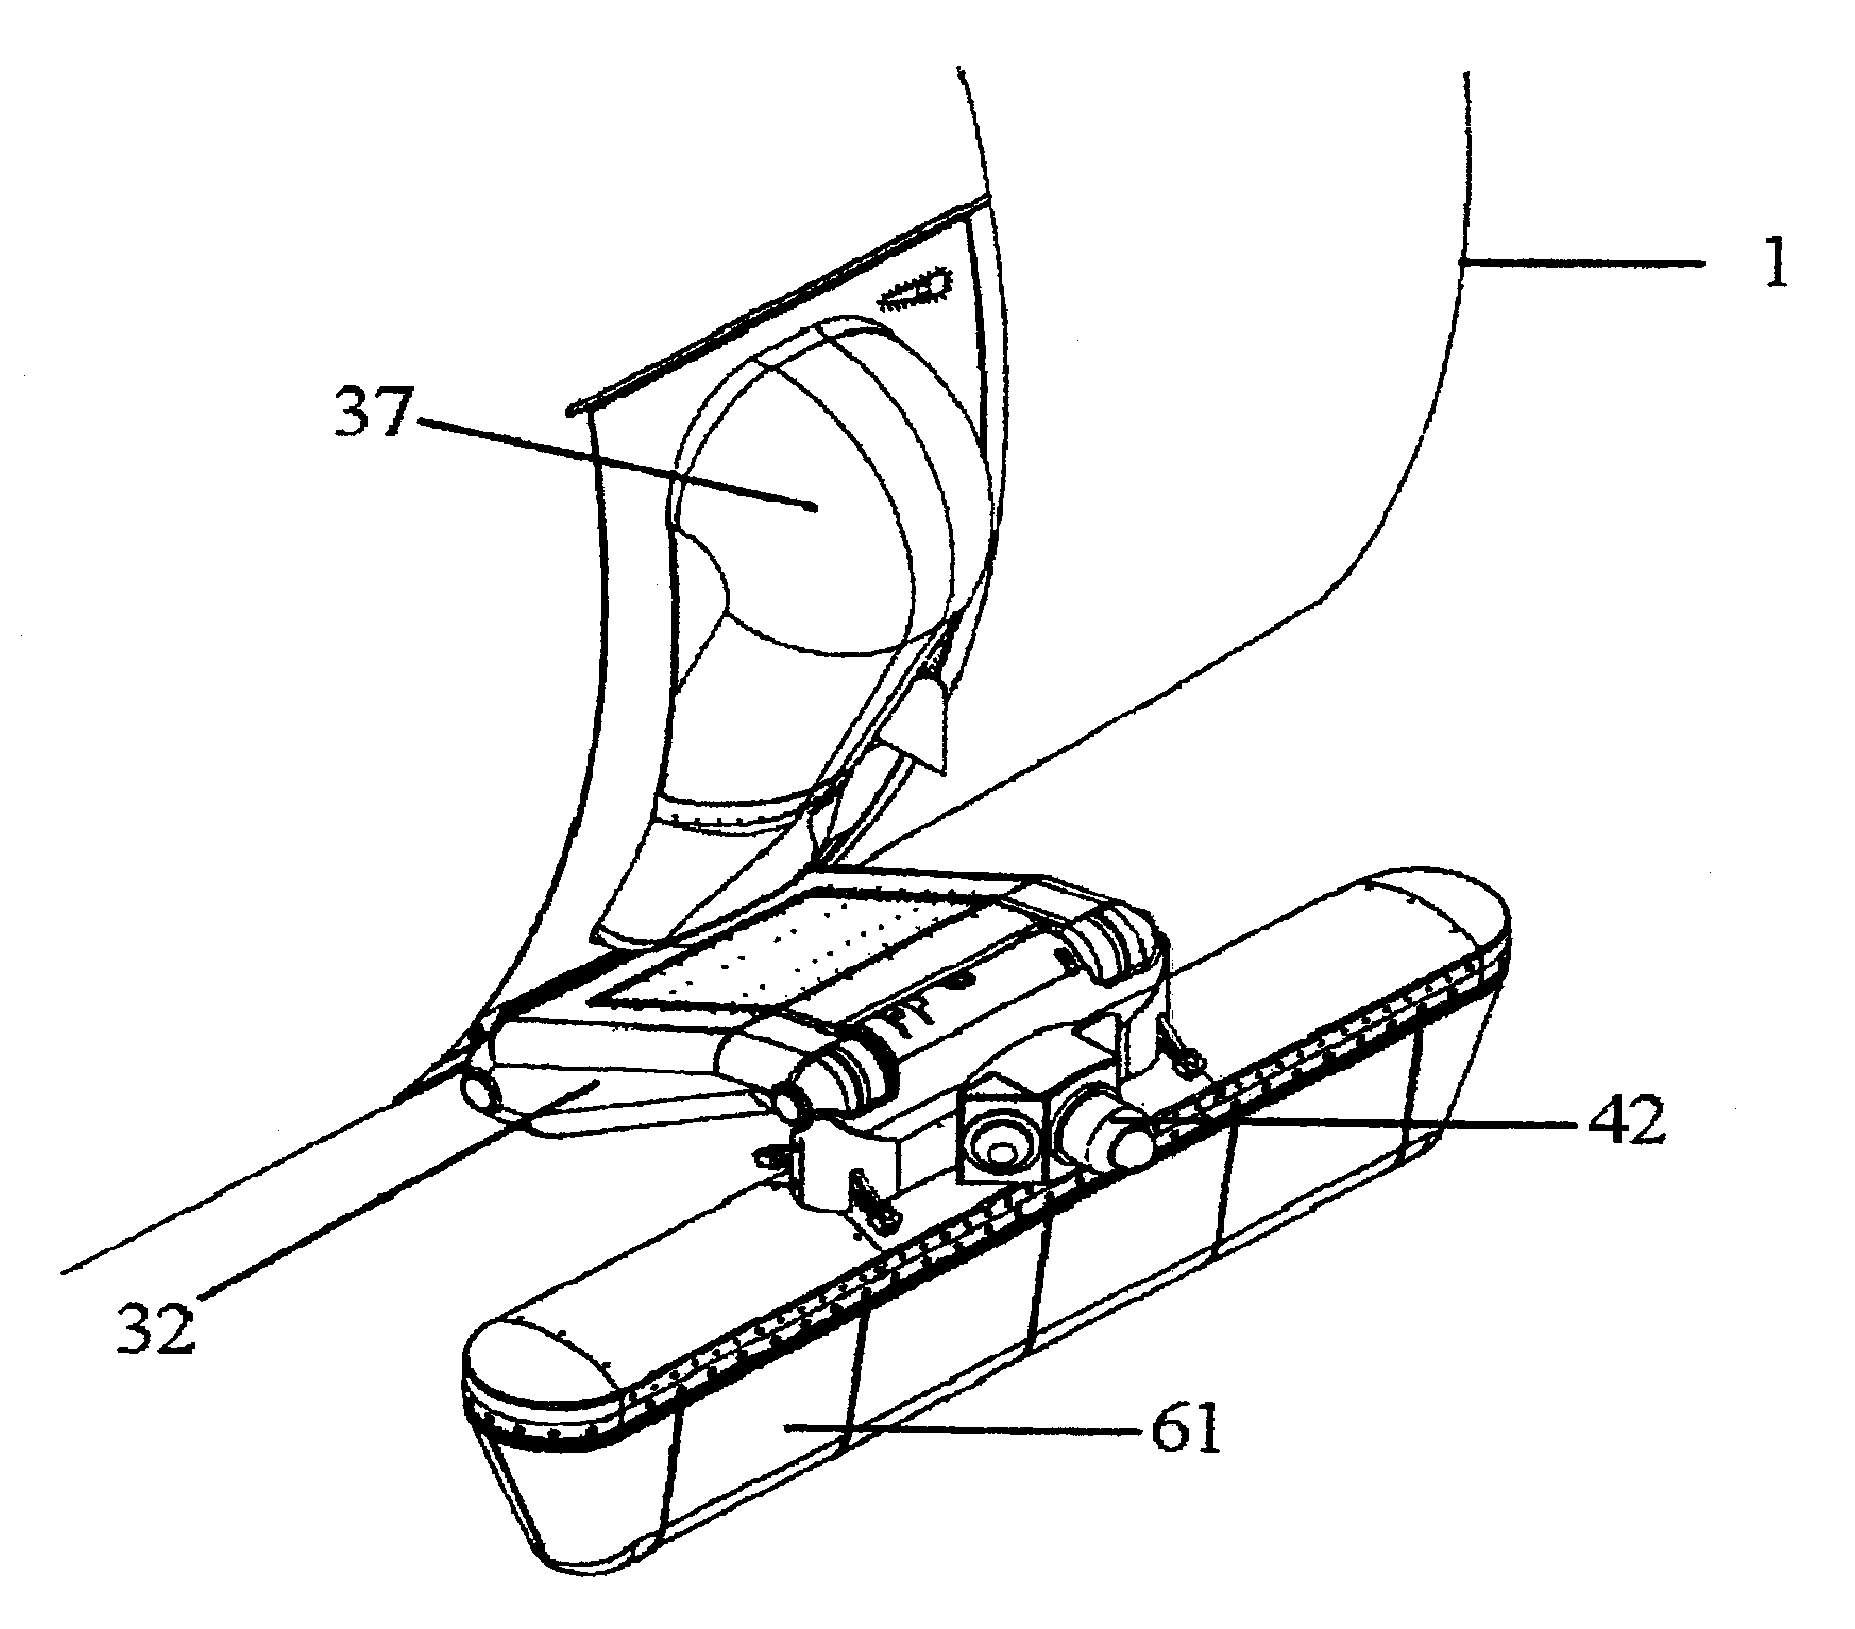 Aircraft based non-dedicated special mission pod mounting apparatus